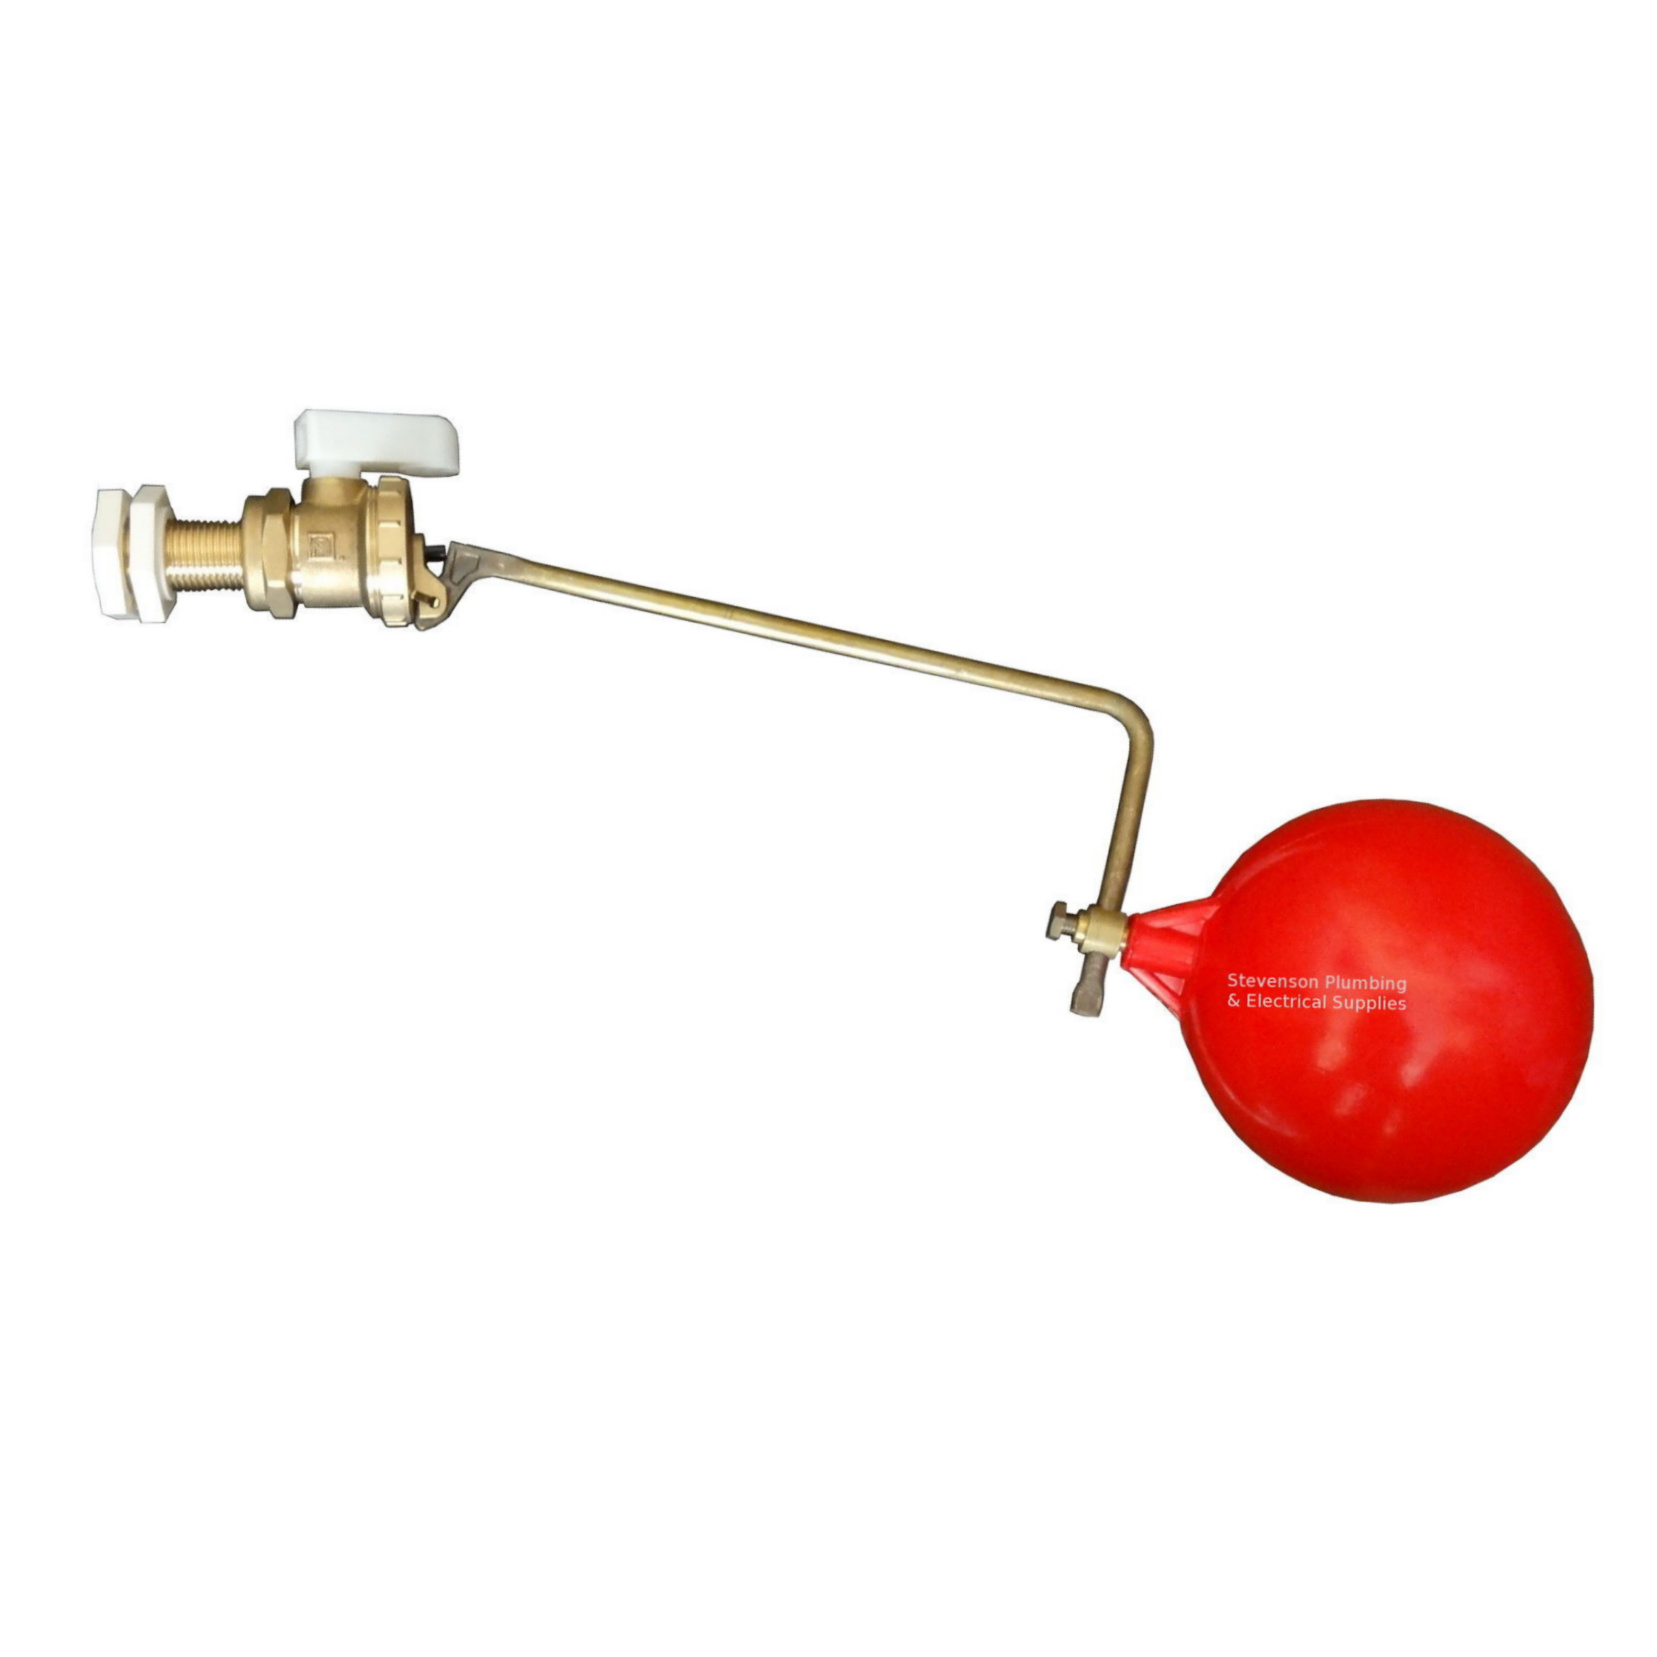 12 High Pressure Brass Ball Cock Valve With Float Bs1212 Part 2